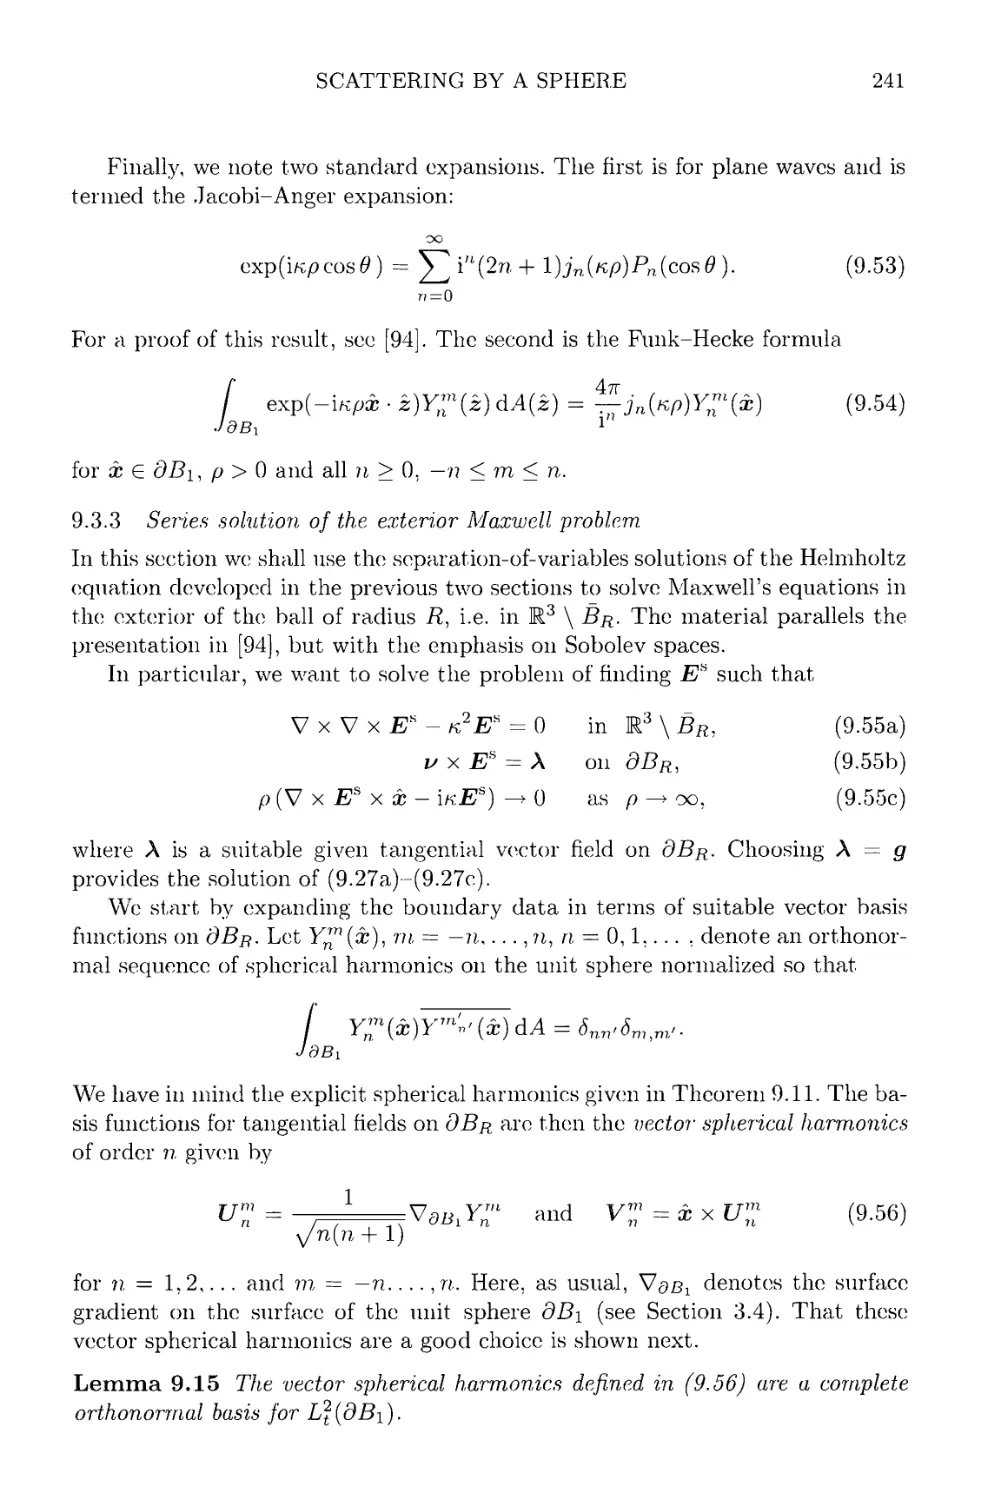 9.3.3 Series solution of the exterior Maxwell problem